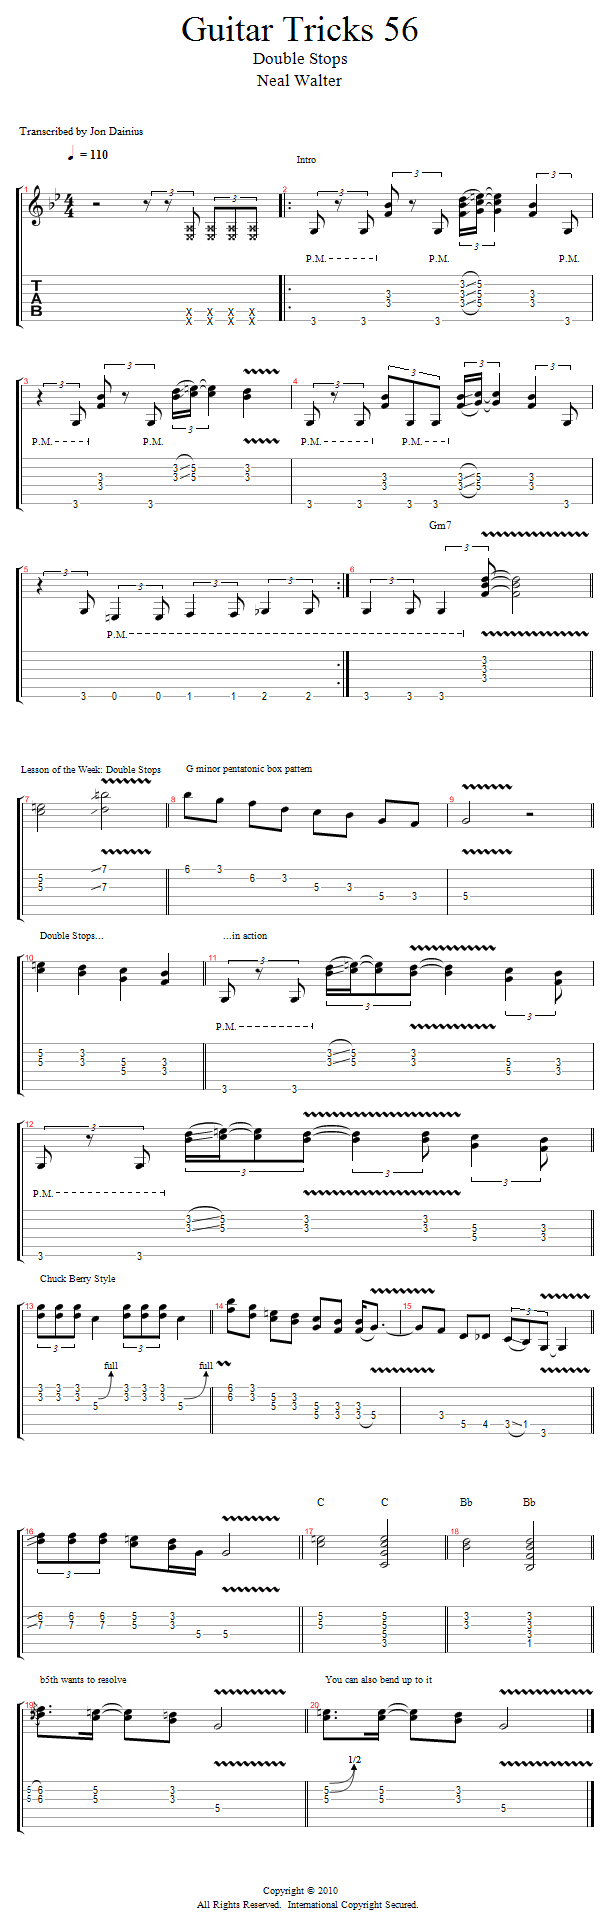 Guitar Tricks 56: Double Stops song notation